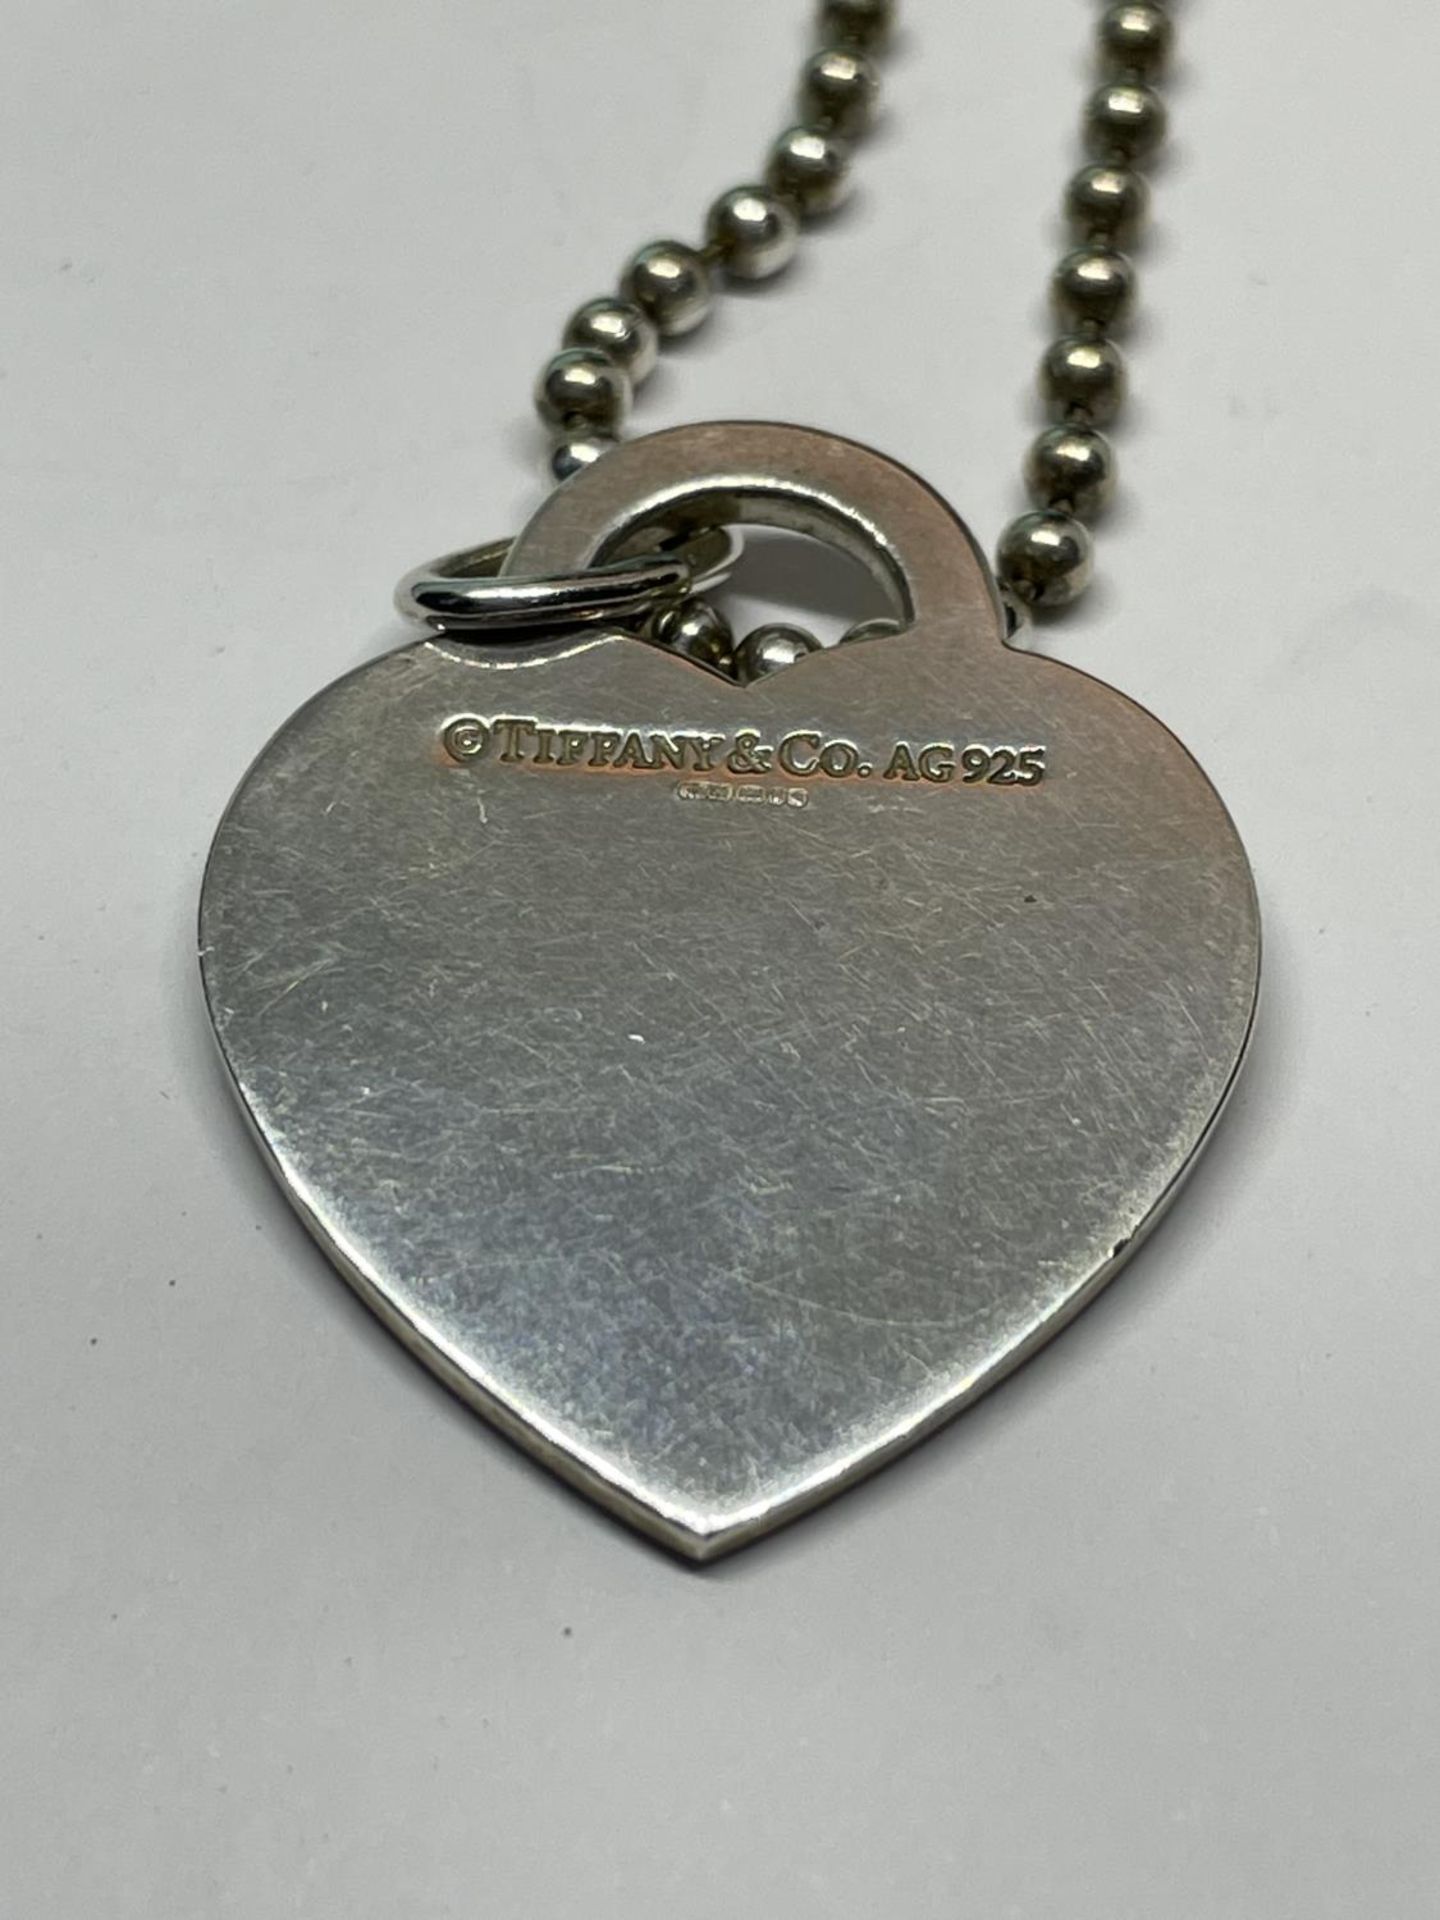 A TIFFANY NECKLACE AND LARGE HEART PENDANT CHAIN LENGTH 76CM HEART 3CM X 2.5CM WITH ORIGINAL POUCH - Image 3 of 8